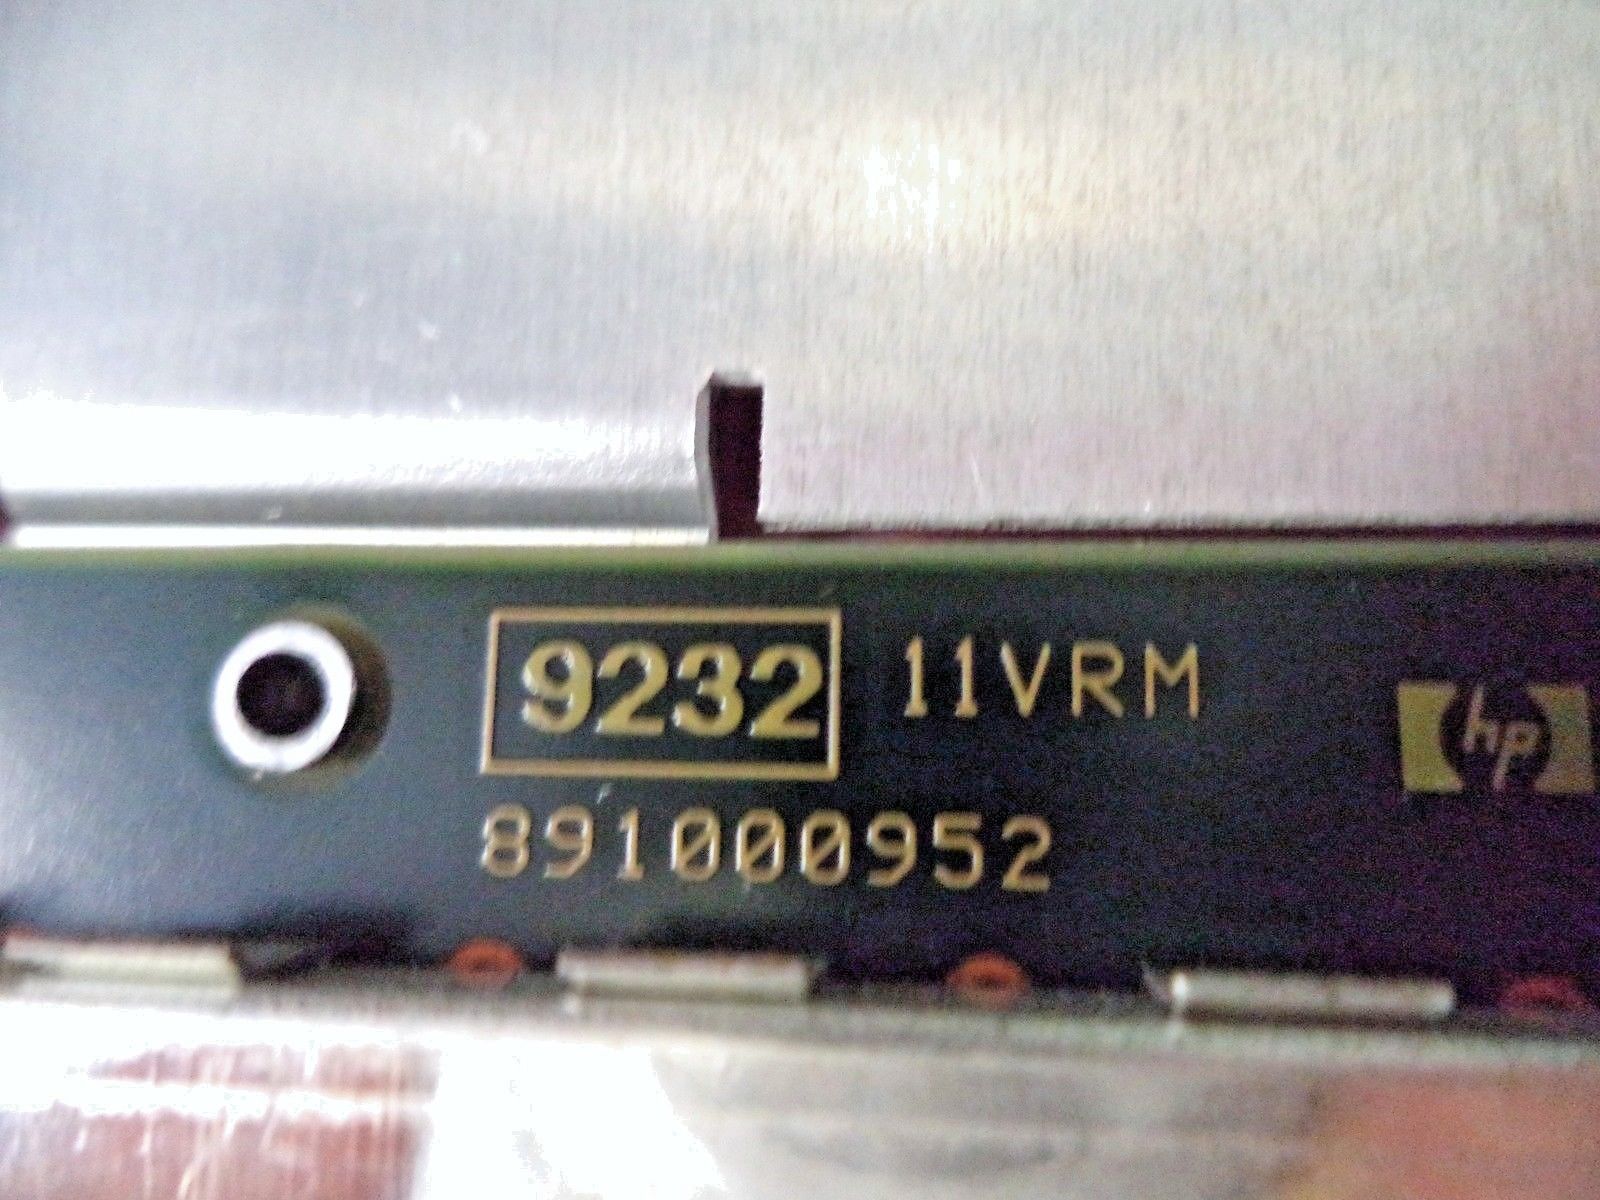 a close up of the back side of a computer chip